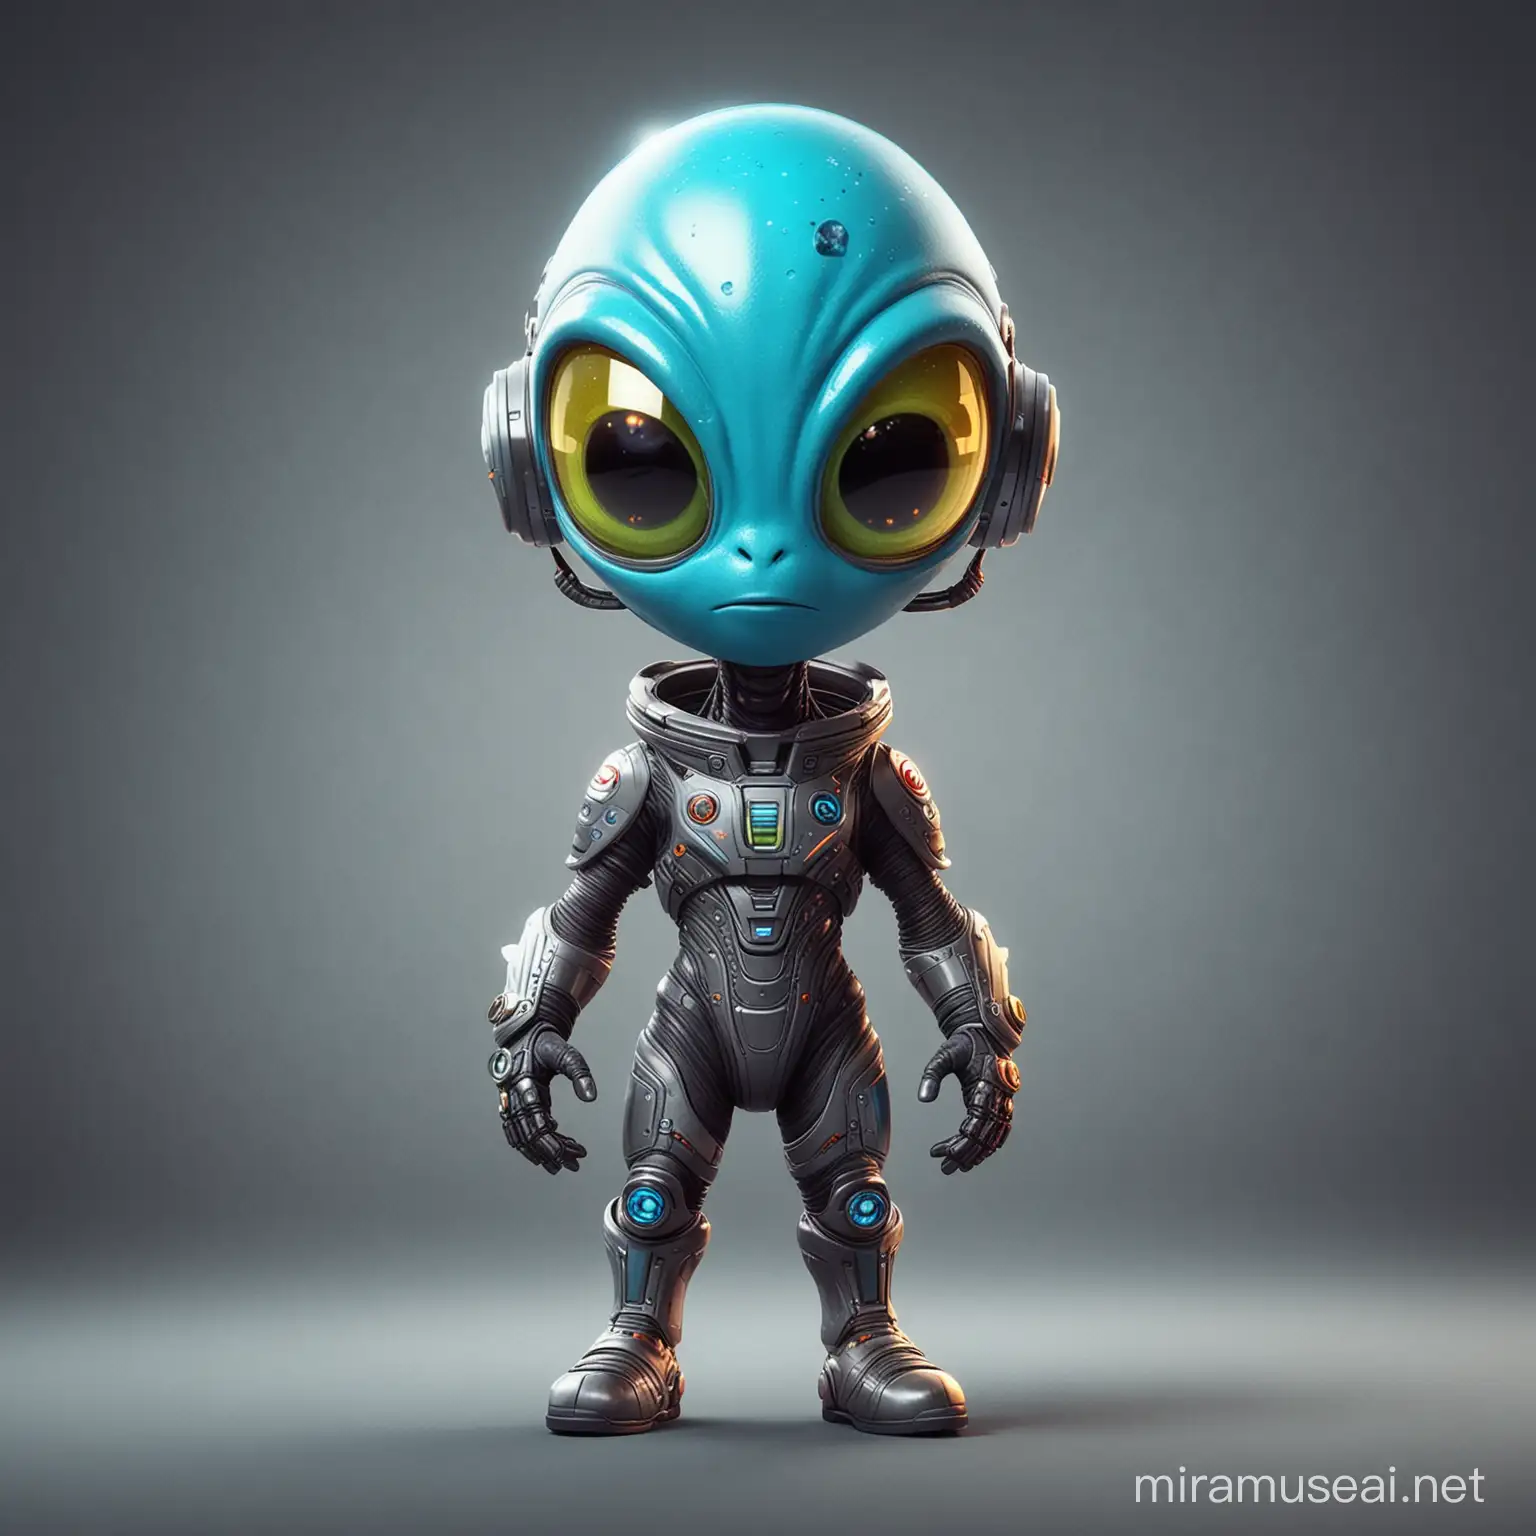 Create a mascot for "Galactic Innovations," a company symbolizing innovation and futurism. The mascot, an alien, should have unique, memorable features, be friendly yet futuristic, and adaptable for various media. Use vibrant colors and consider adding futuristic elements like antennas or space suits for inspiration.